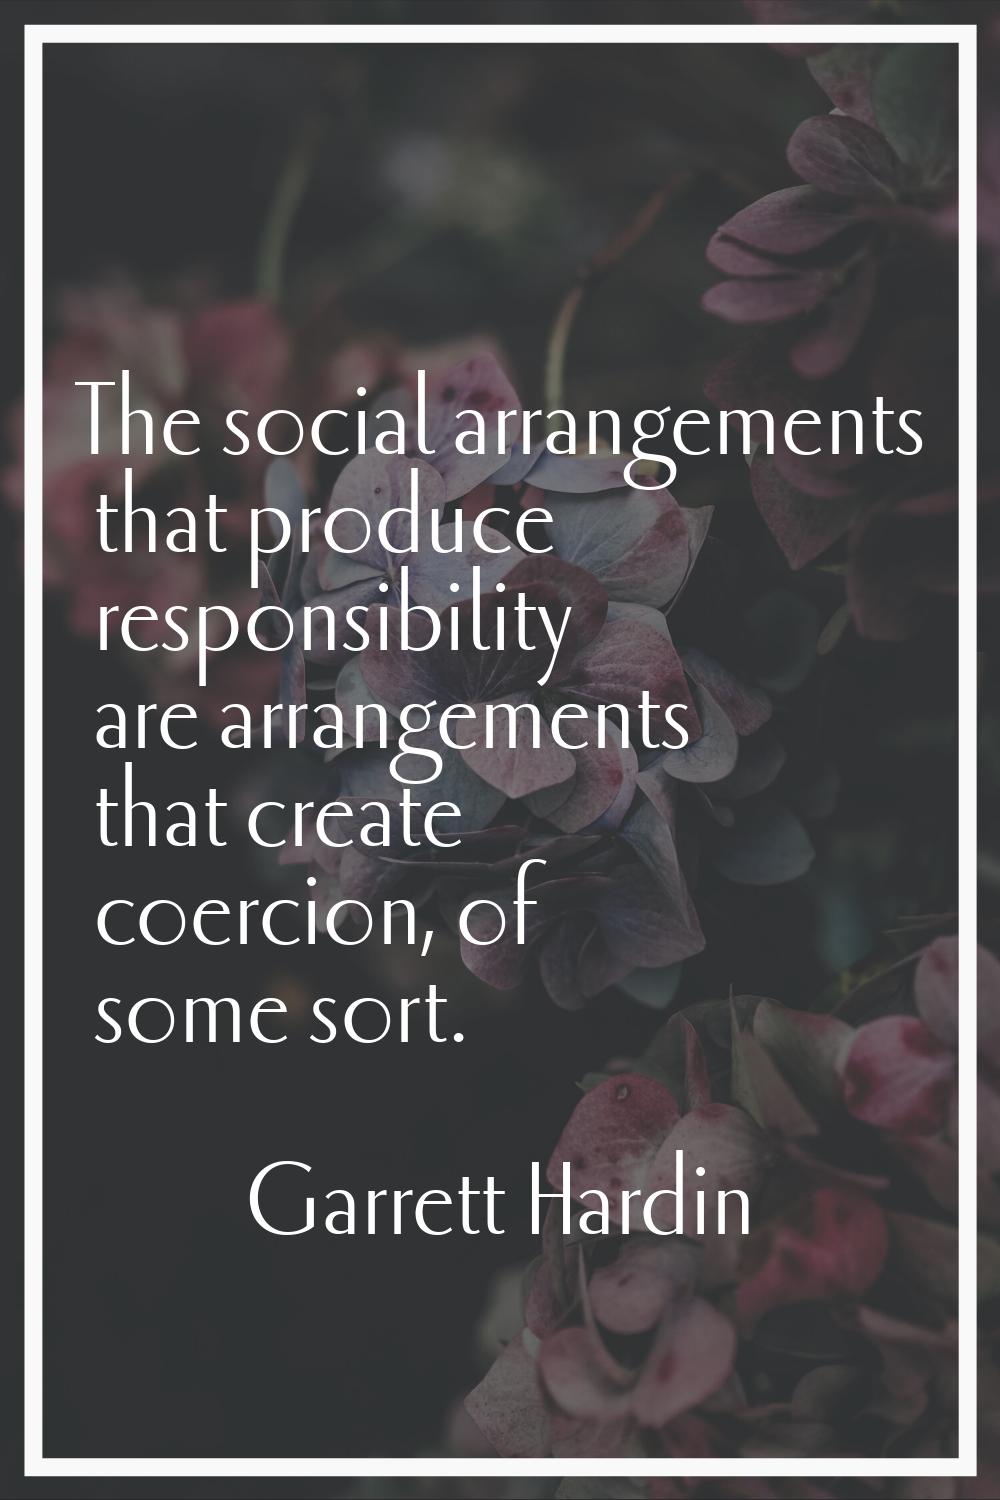 The social arrangements that produce responsibility are arrangements that create coercion, of some 